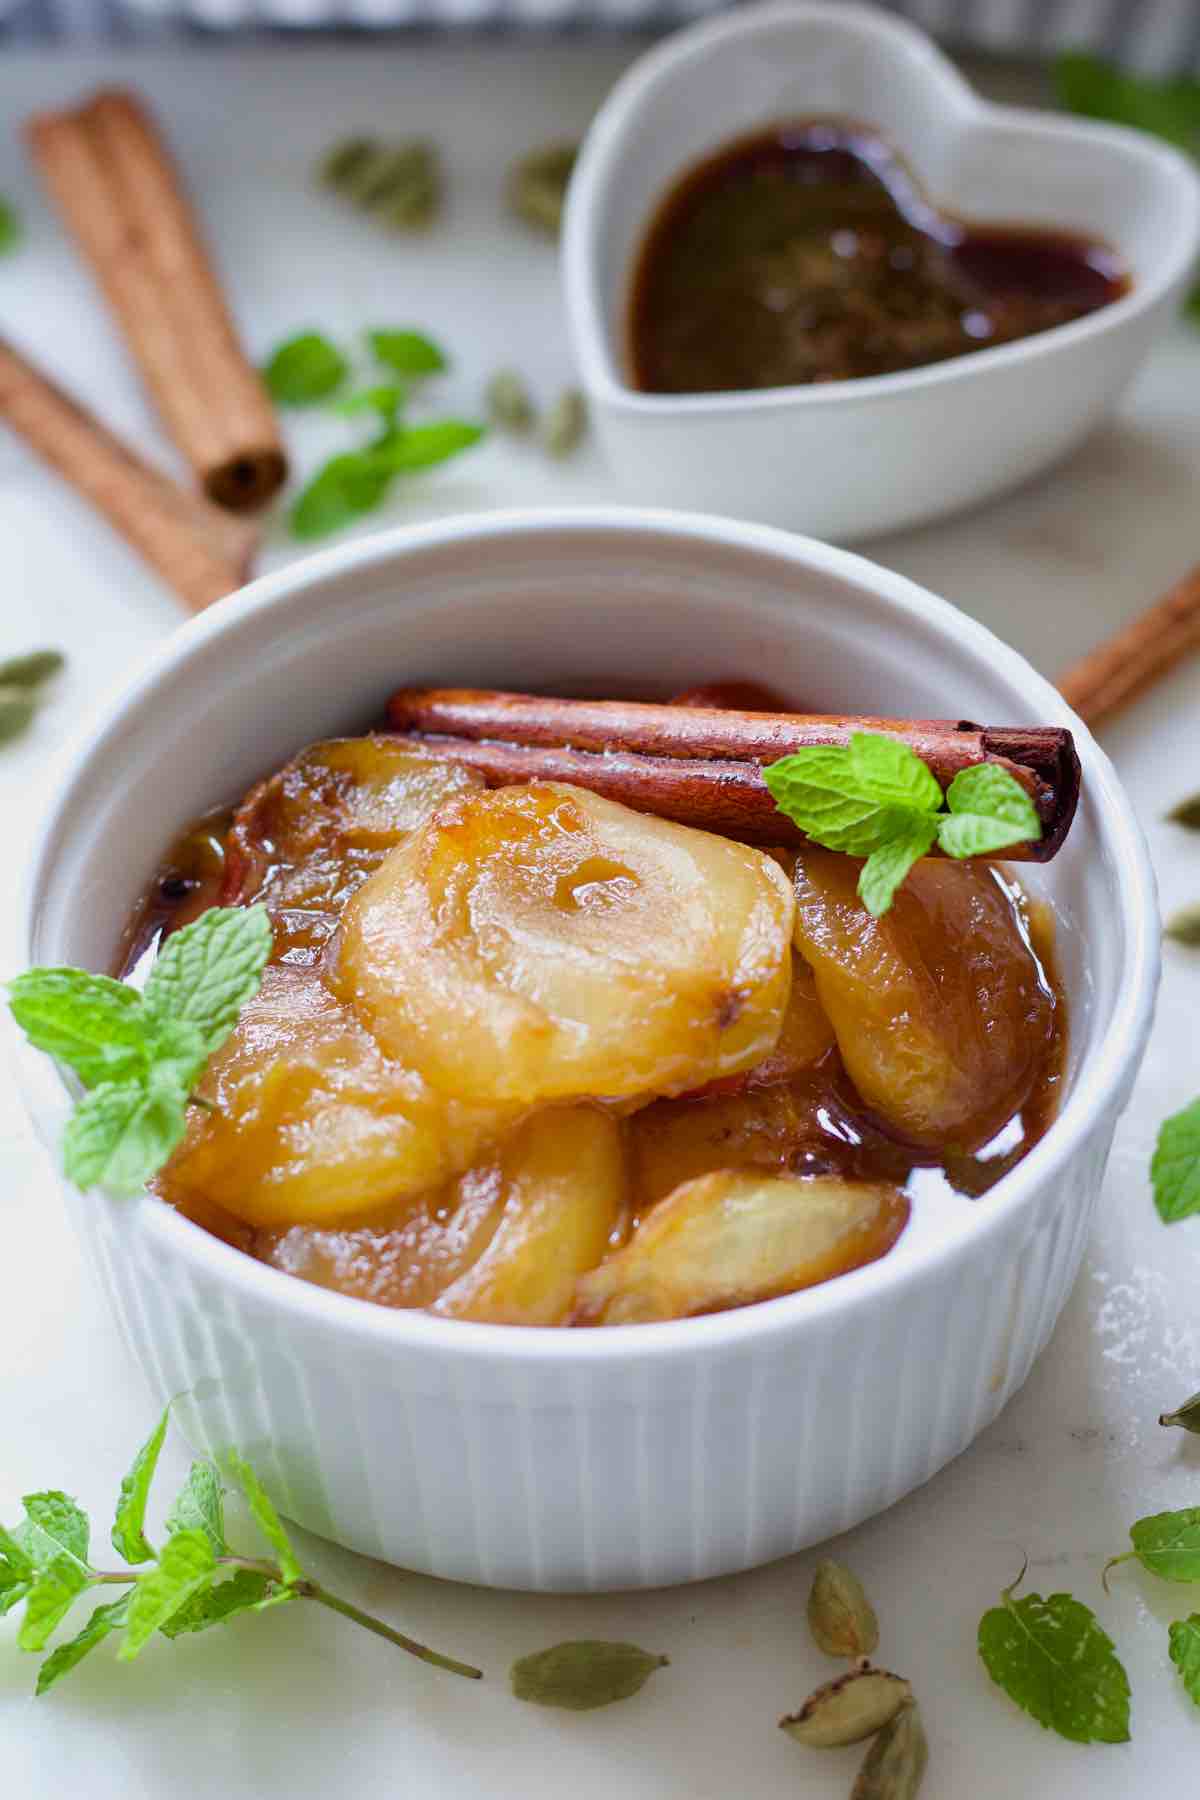 Bowl with stewed plums decorated with fresh mint.